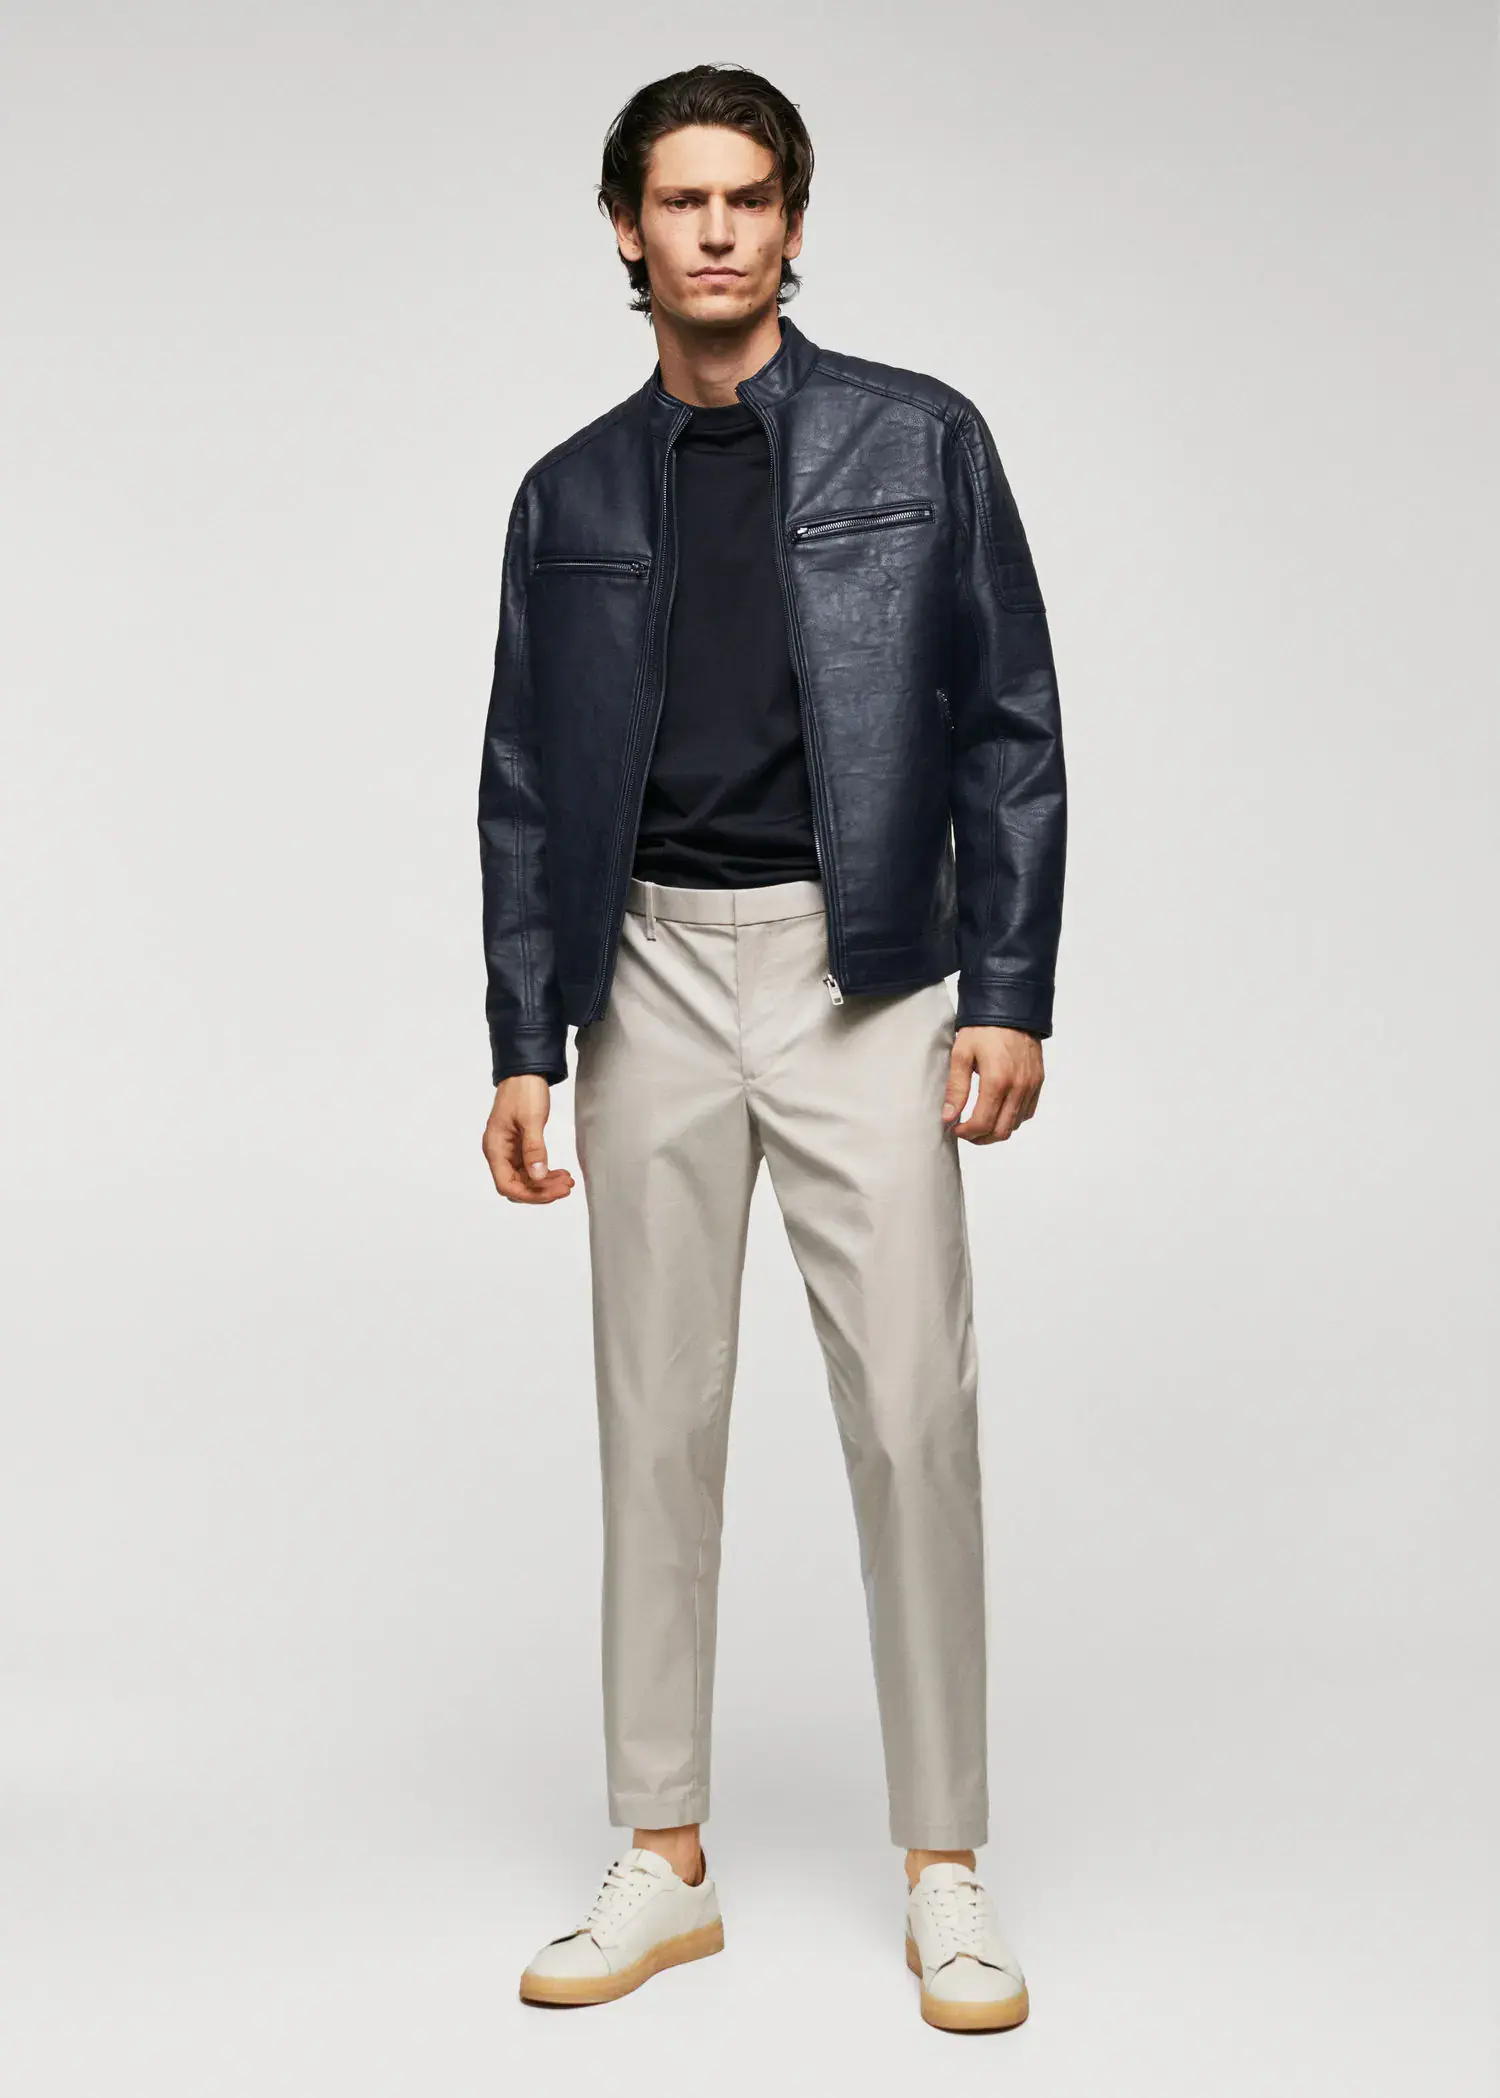 Mango Nappa leather-effect jacket. a man in a black jacket and white pants. 